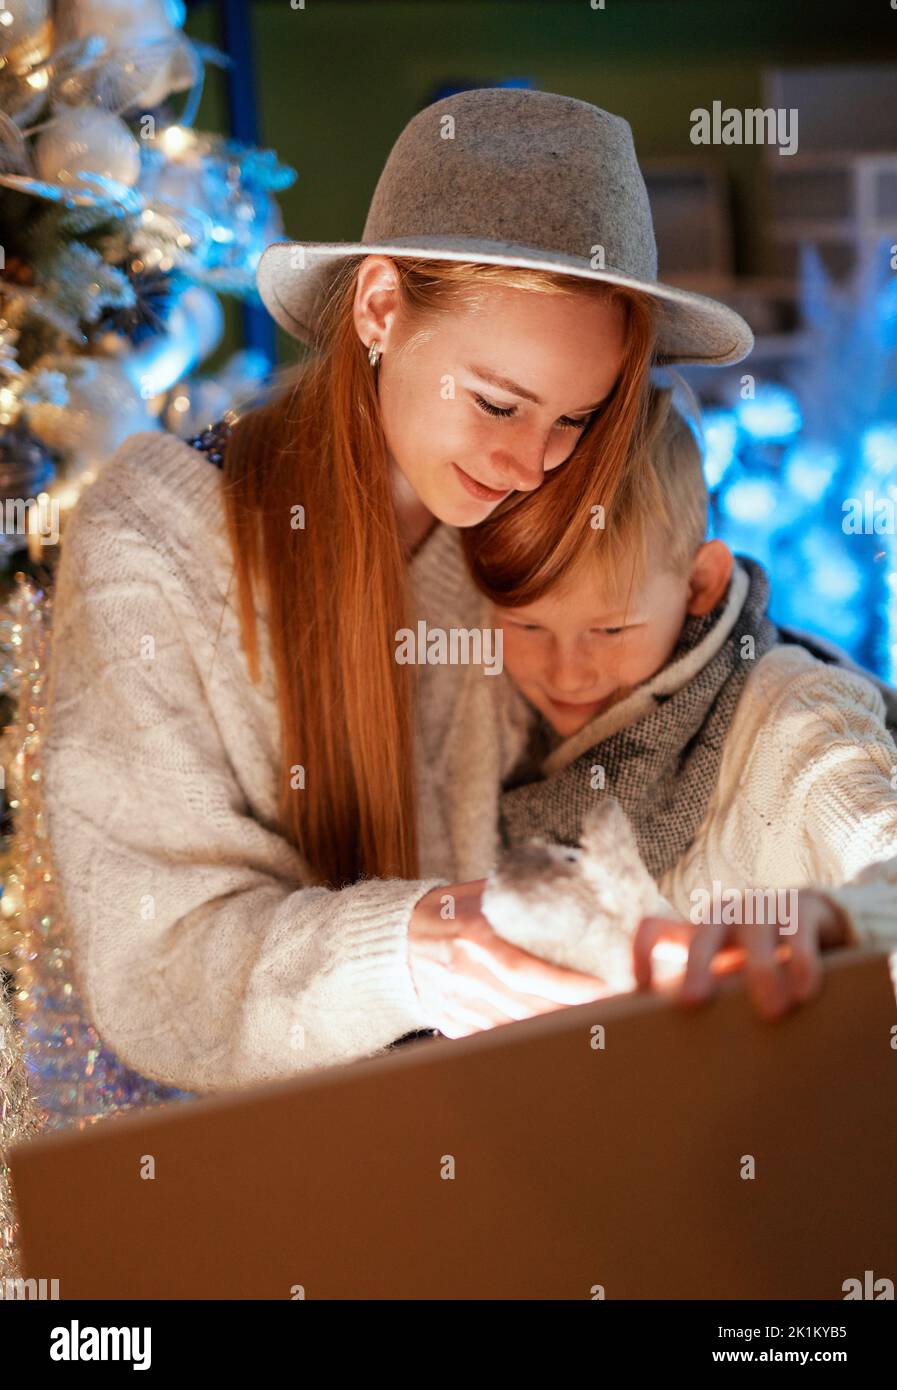 New Year 2023: Adorable brother and sister opens Christmas gift at home with xmas tree on background. Happy emotions, laughing while opening a present with light inside. High quality vertical image Stock Photo